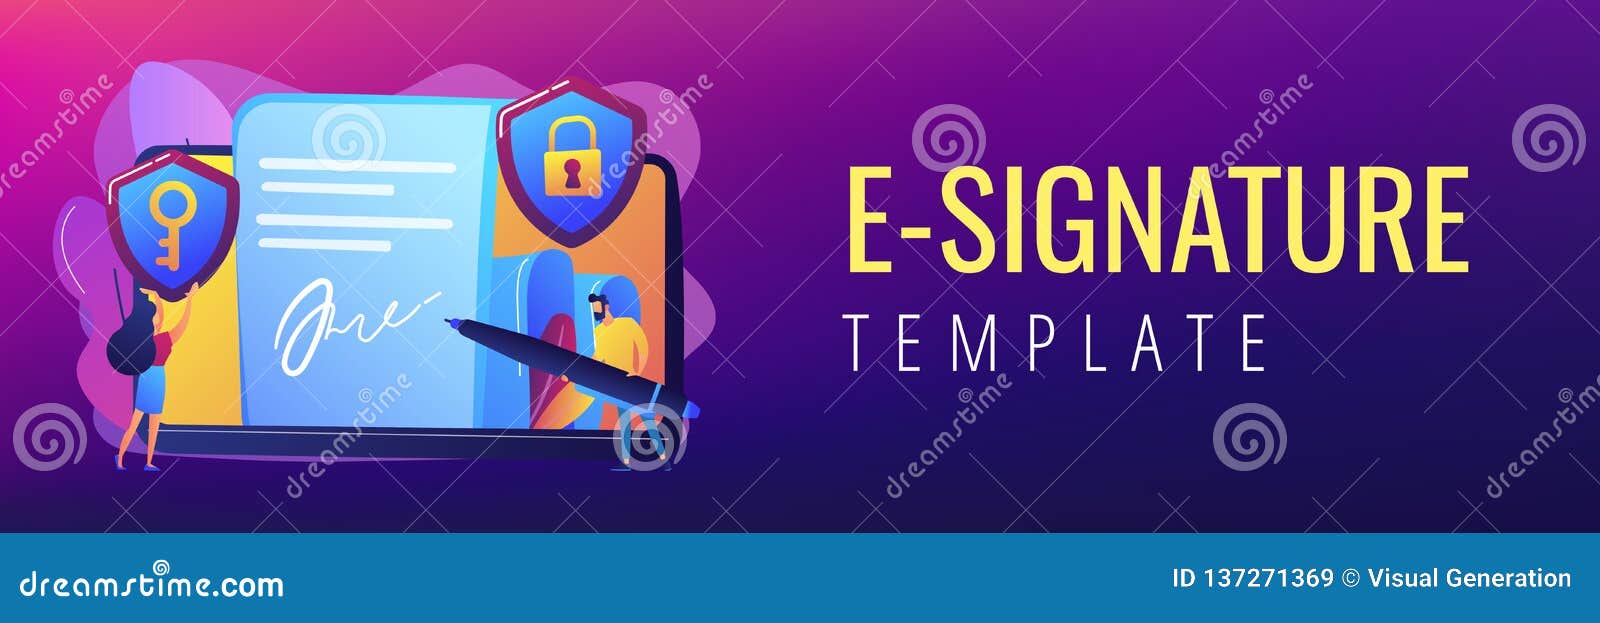 Electronic Signature Concept Banner  Header  Stock Vector Illustration 